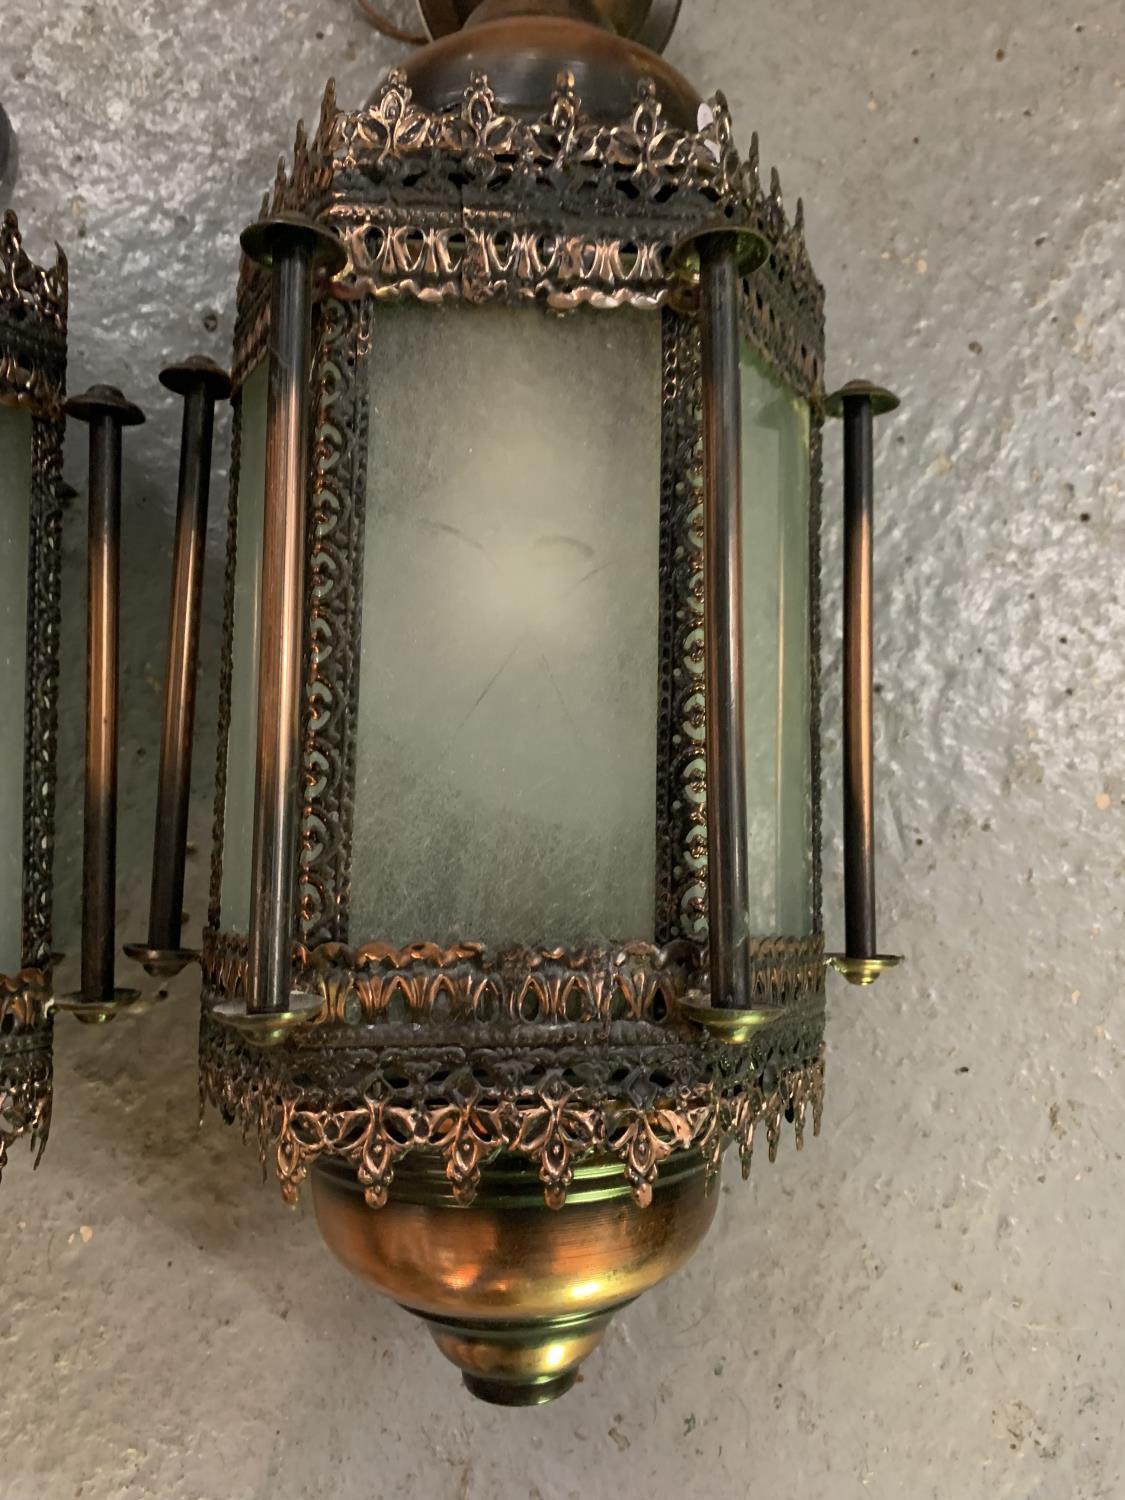 TWO MORROCAN STYLE LIGHTS WITH GLASS PANELS - Image 4 of 6